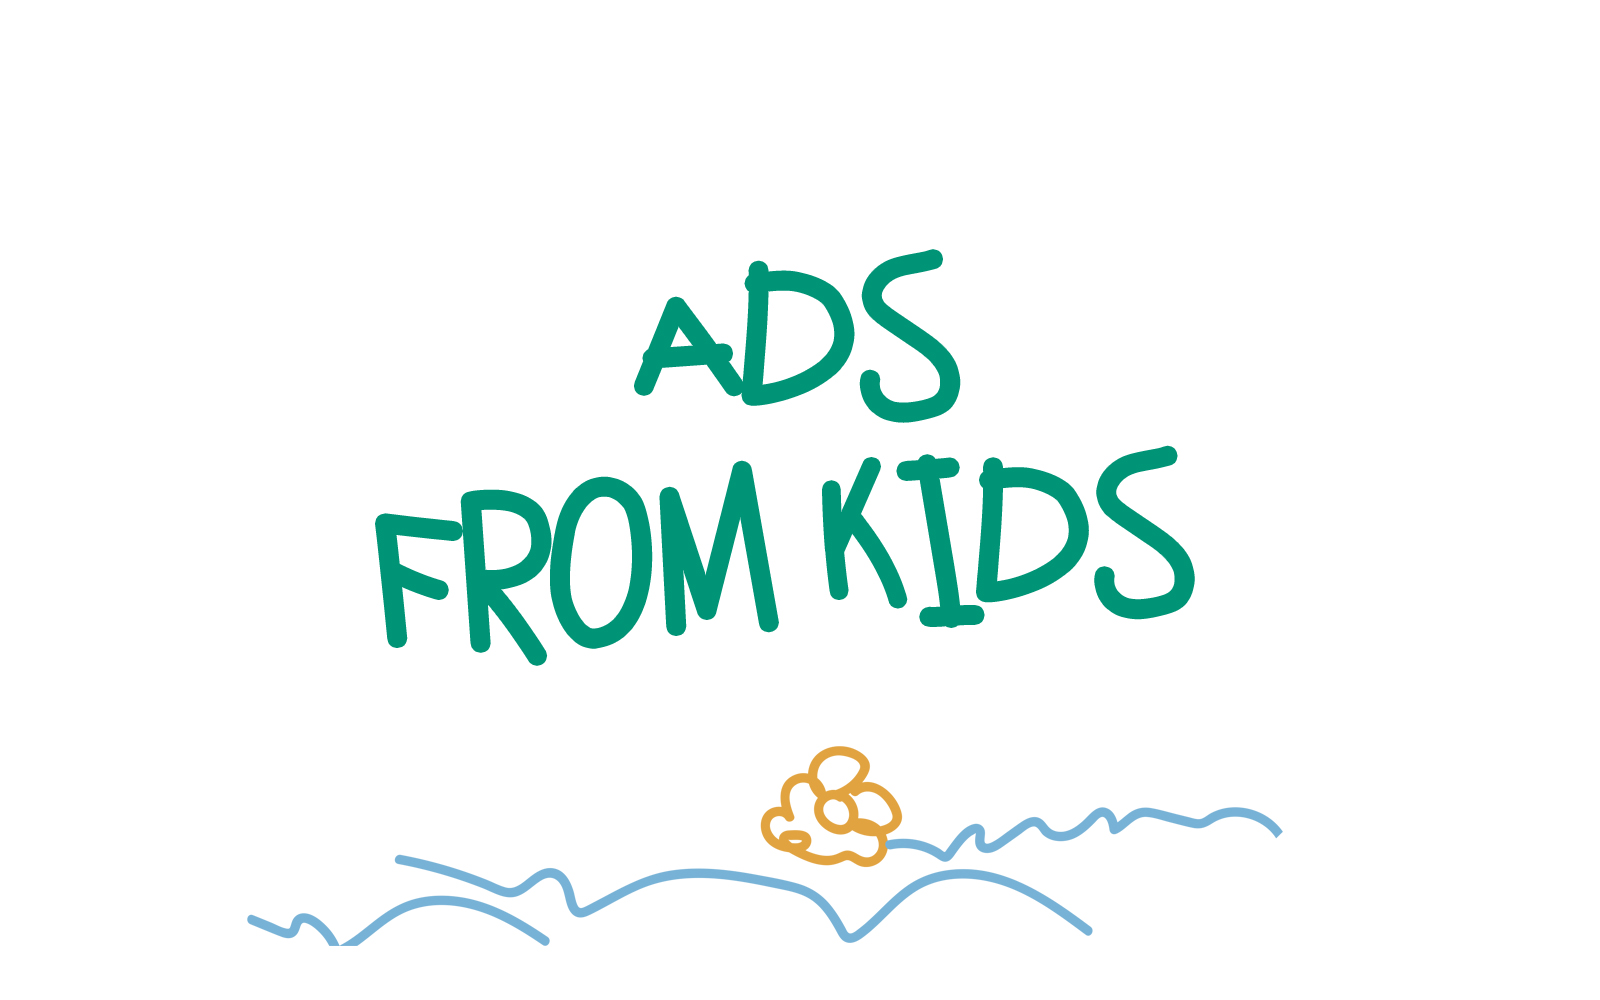 Ads from kids